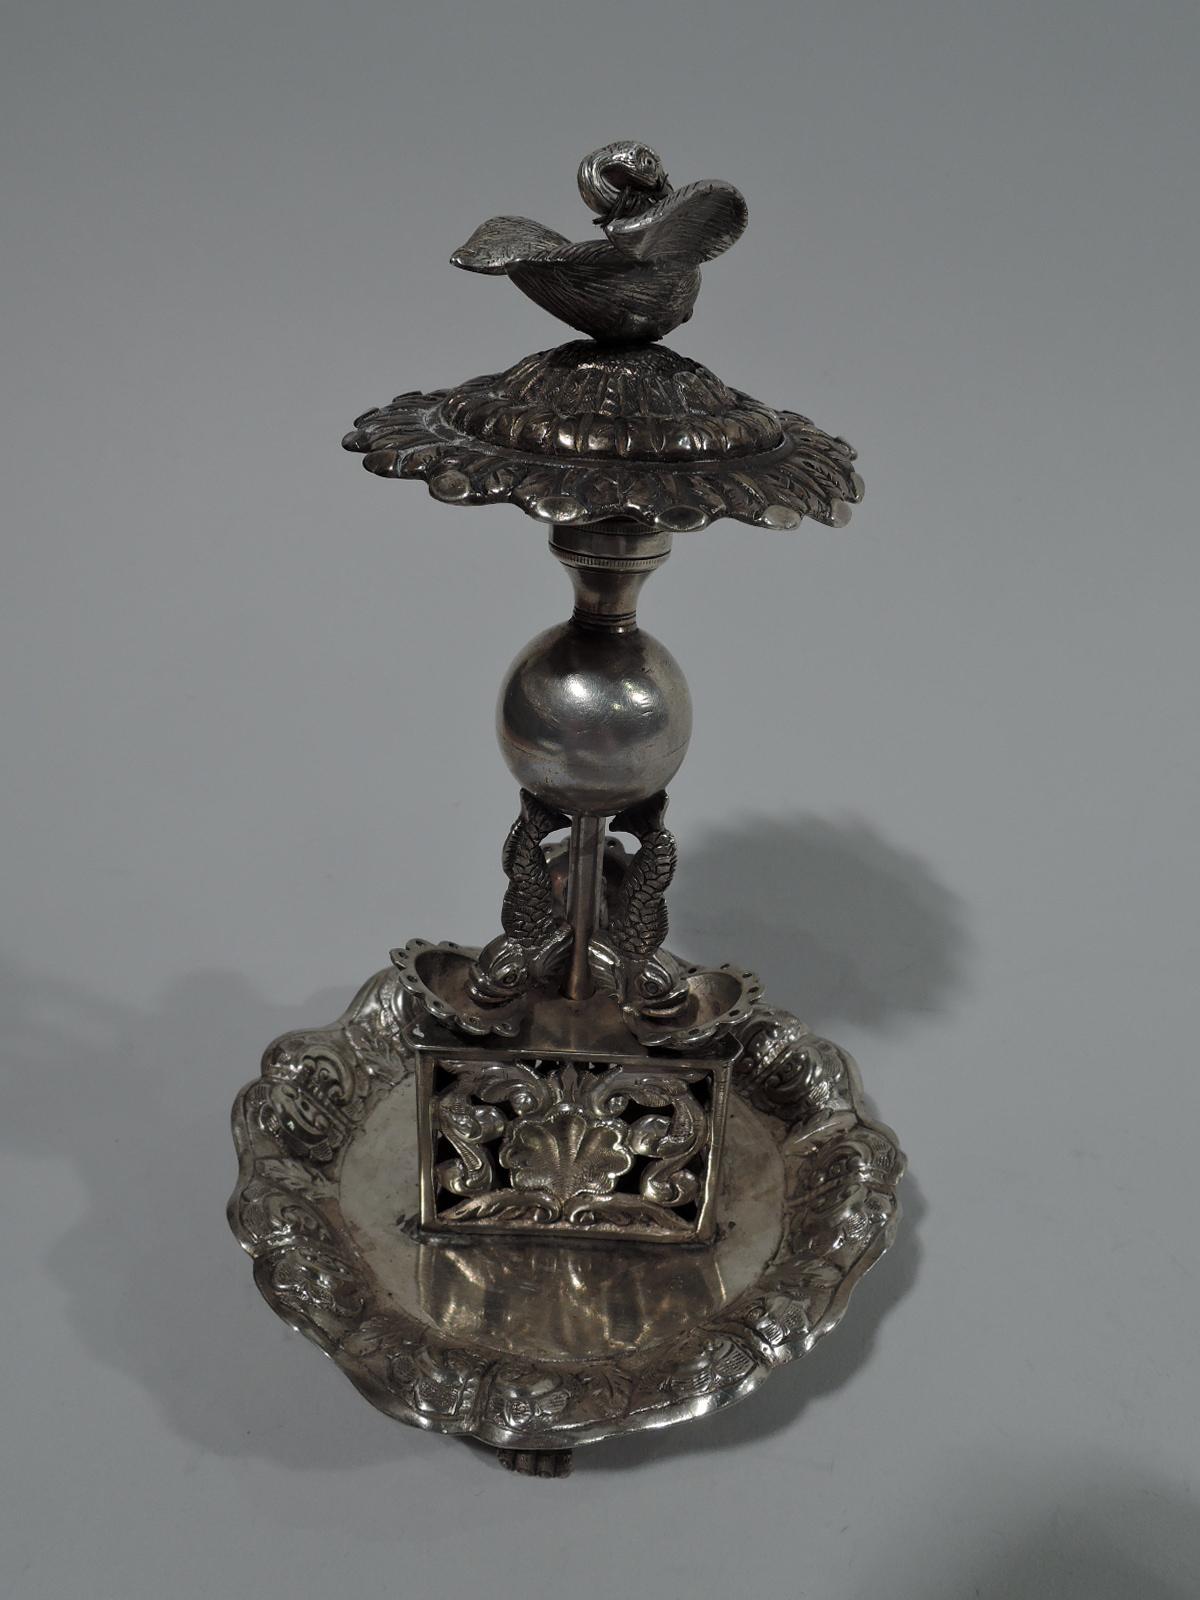 Antique Portuguese neoclassical silver toothpick holder. Narrow cylindrical shaft surrounded by dolphins on scallop shells supporting ball and mounted to triangular base with pierced scroll-and-shell sides. Round tray with scalloped rim and chased